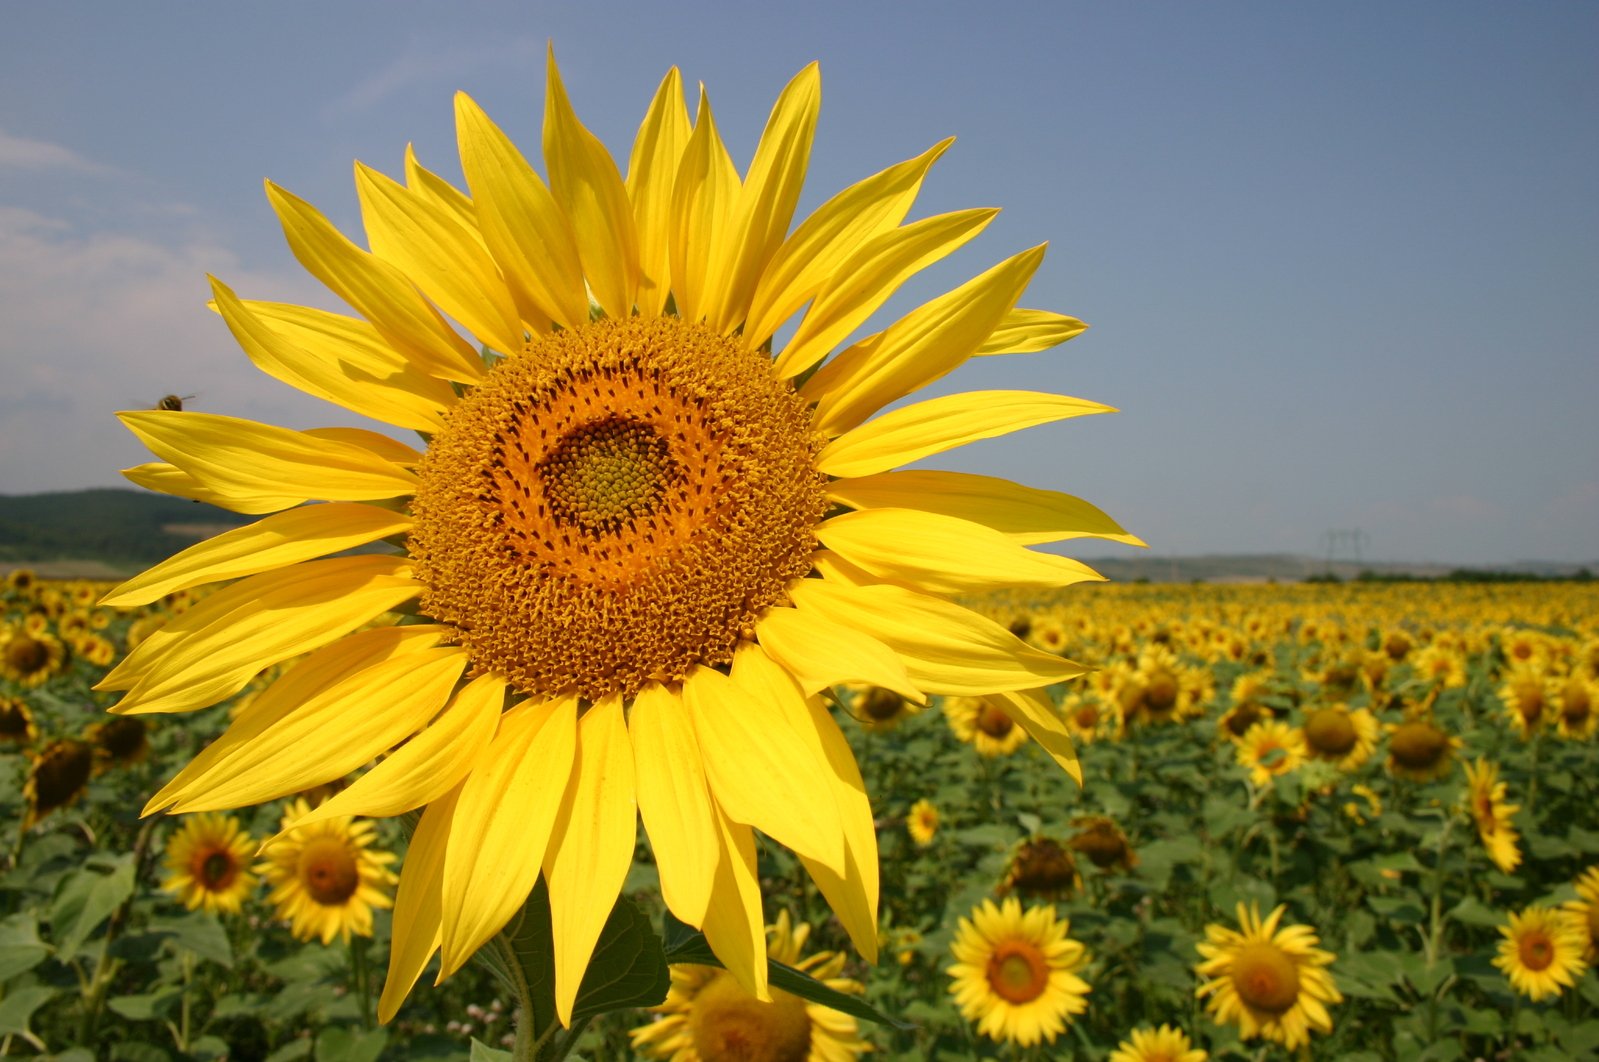 a large sunflower is shown in front of other flowers